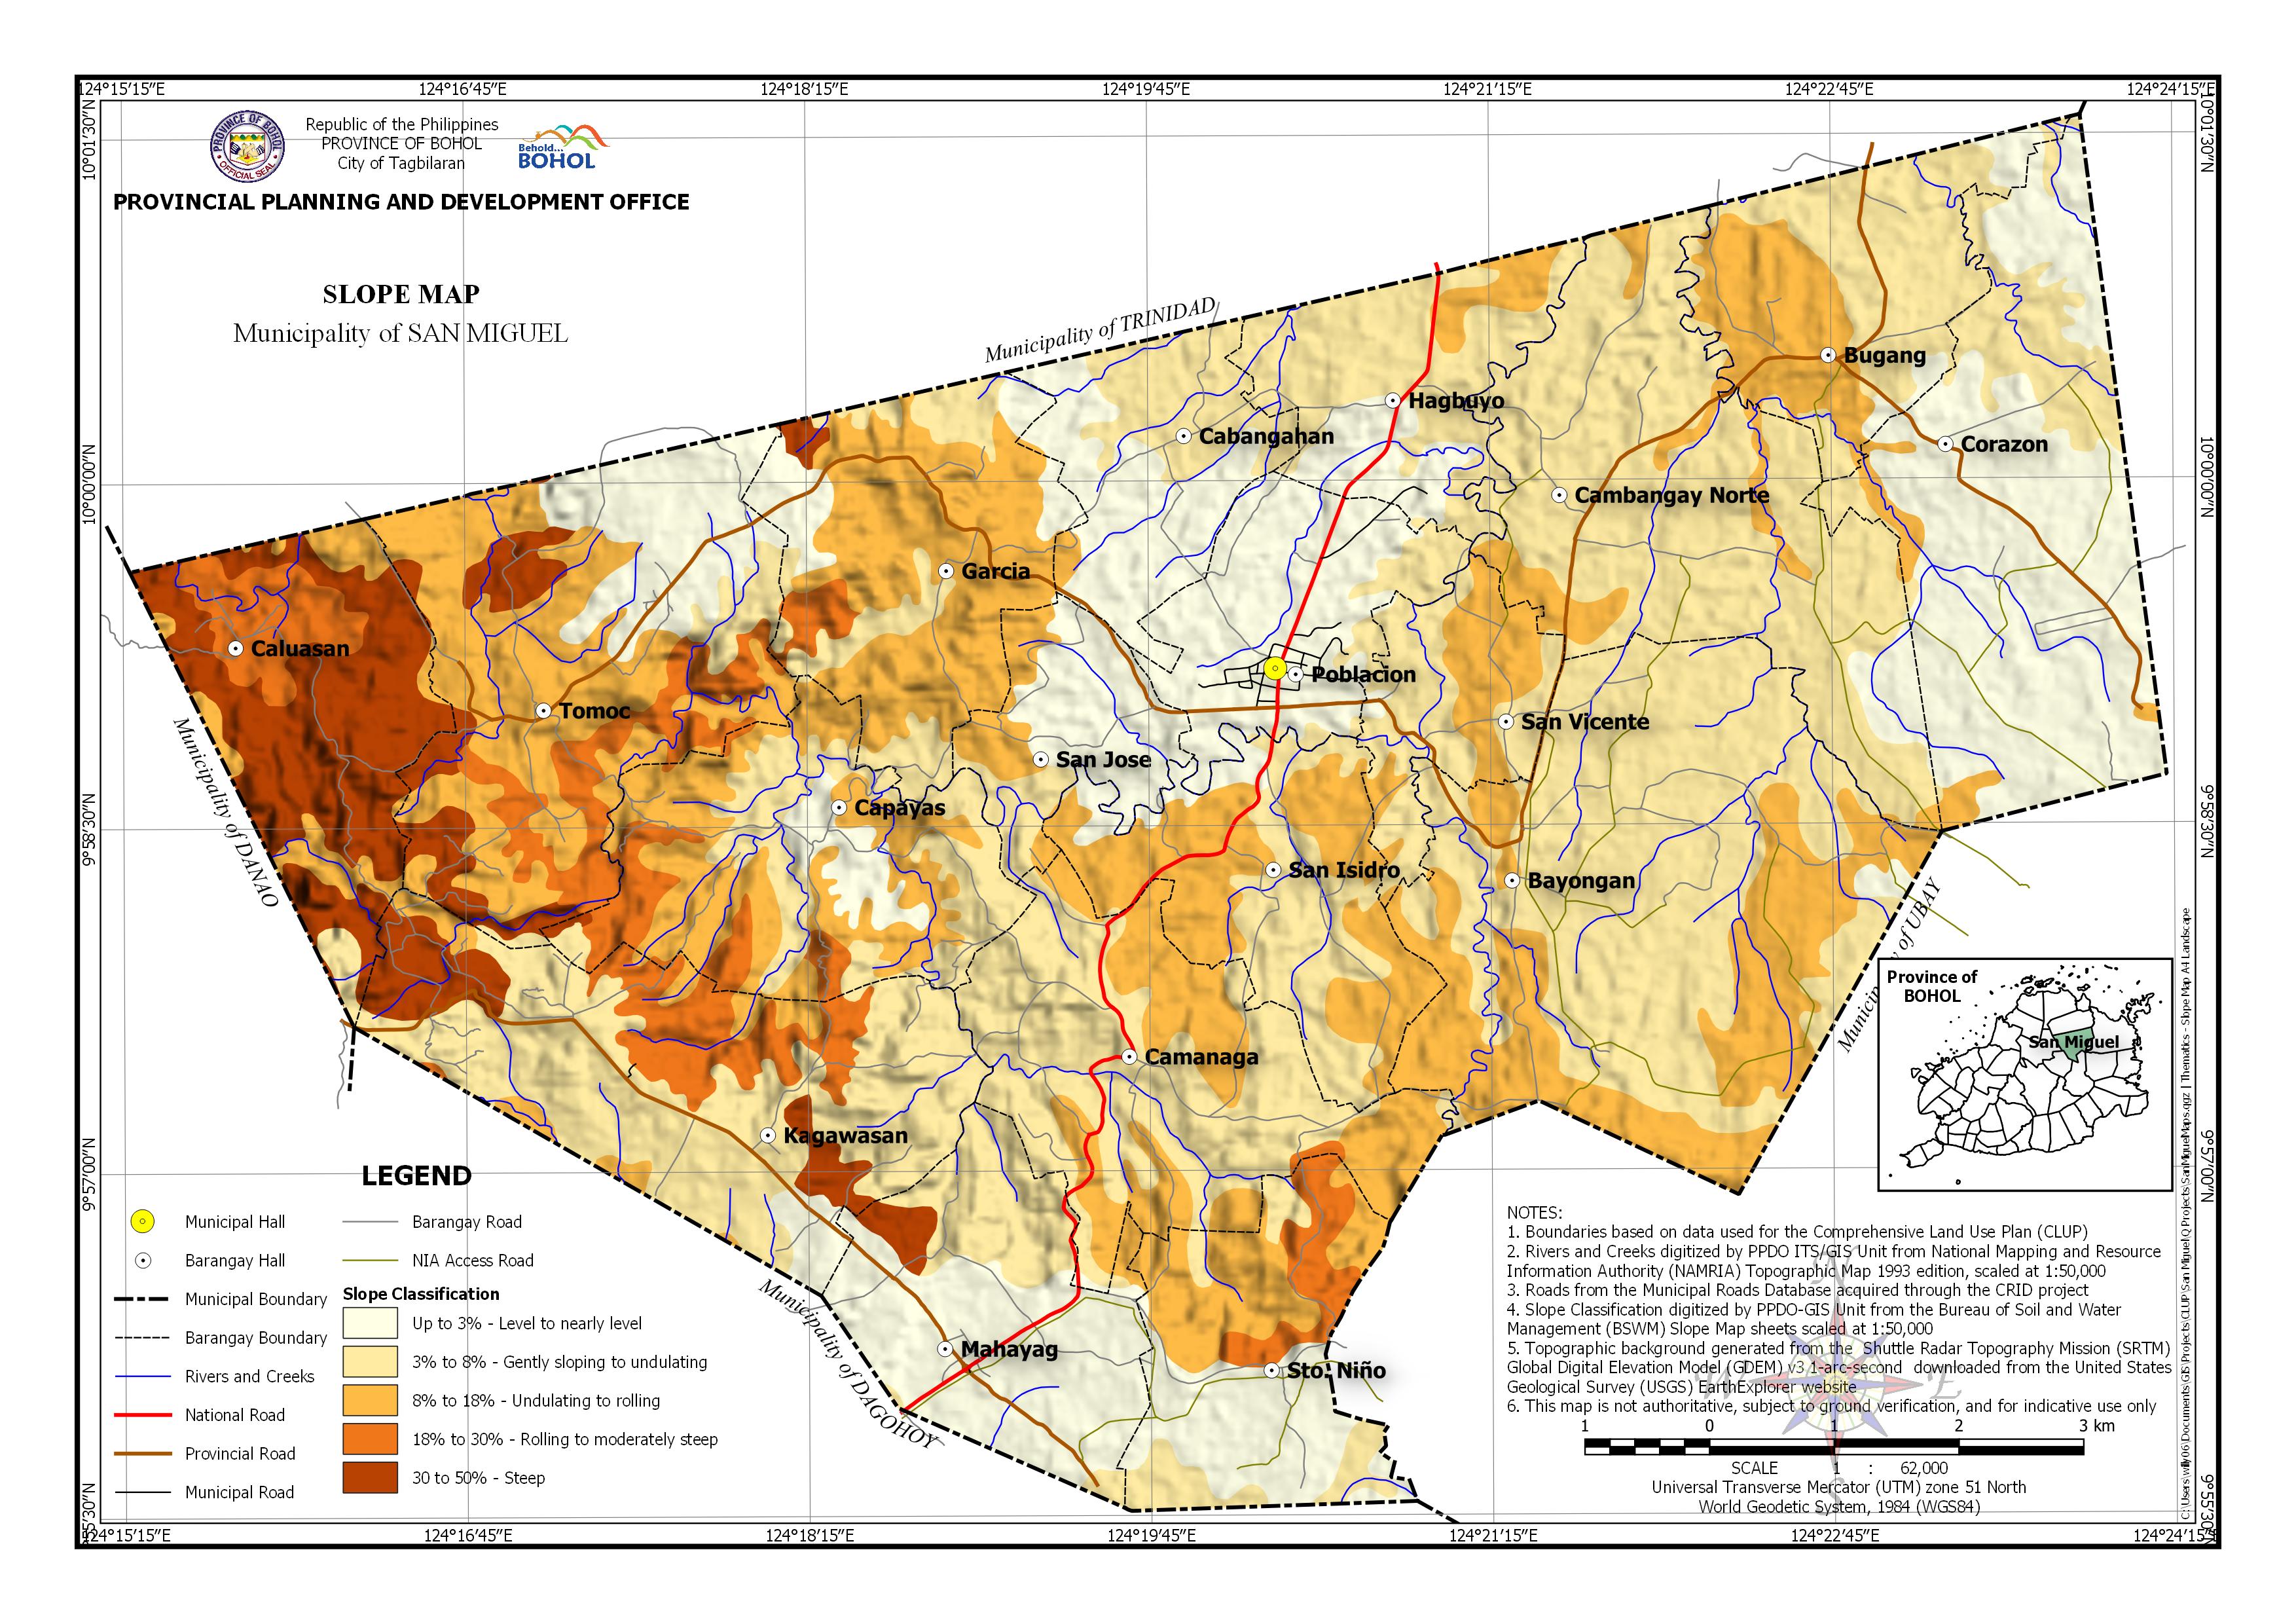 Slope Classification Map